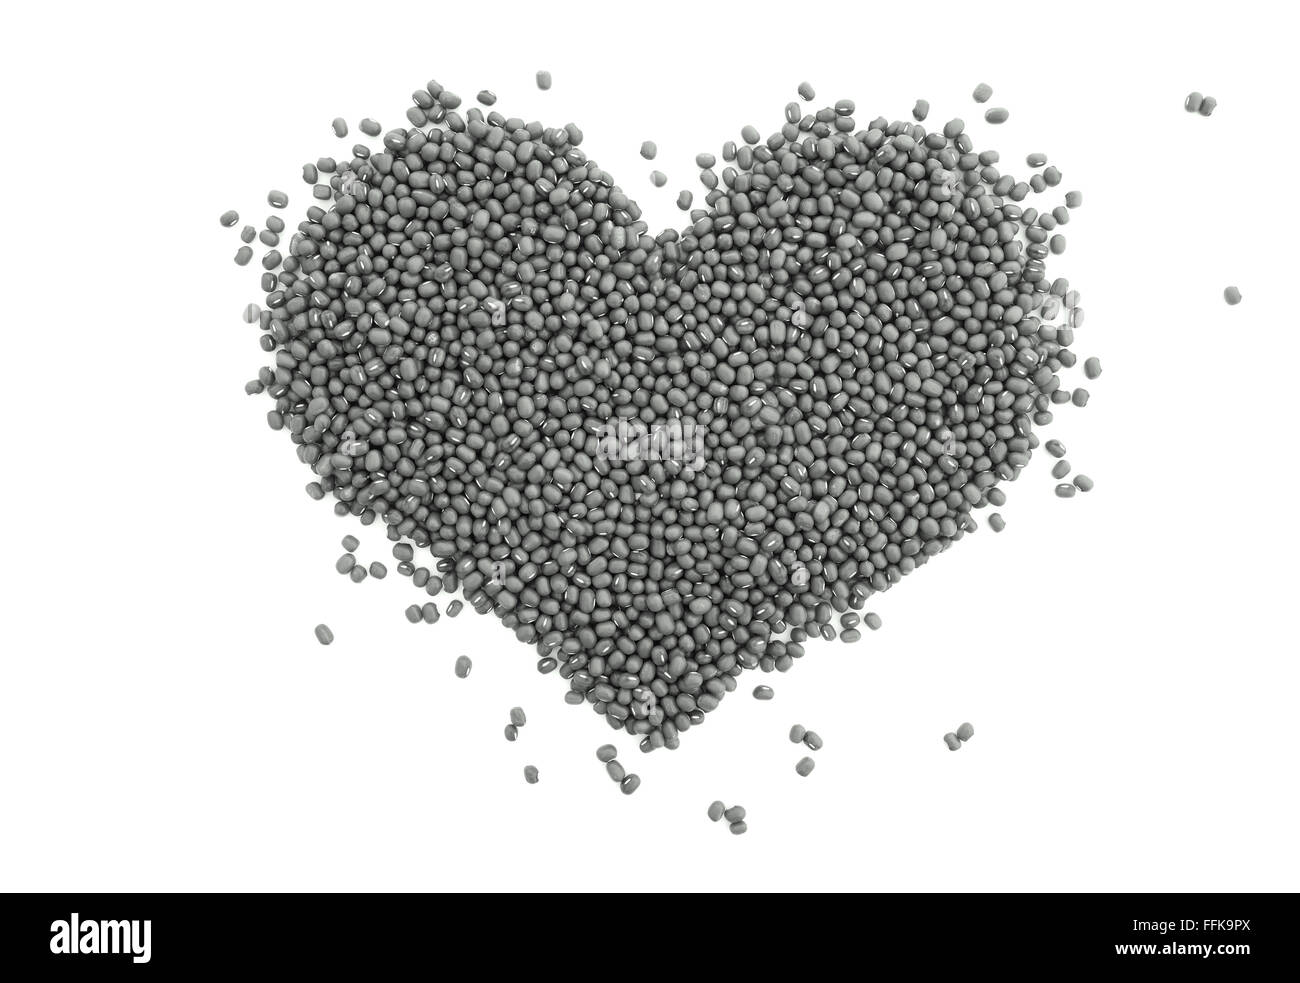 Mung beans in a heart shape, isolated on a white background - monochrome processing Stock Photo